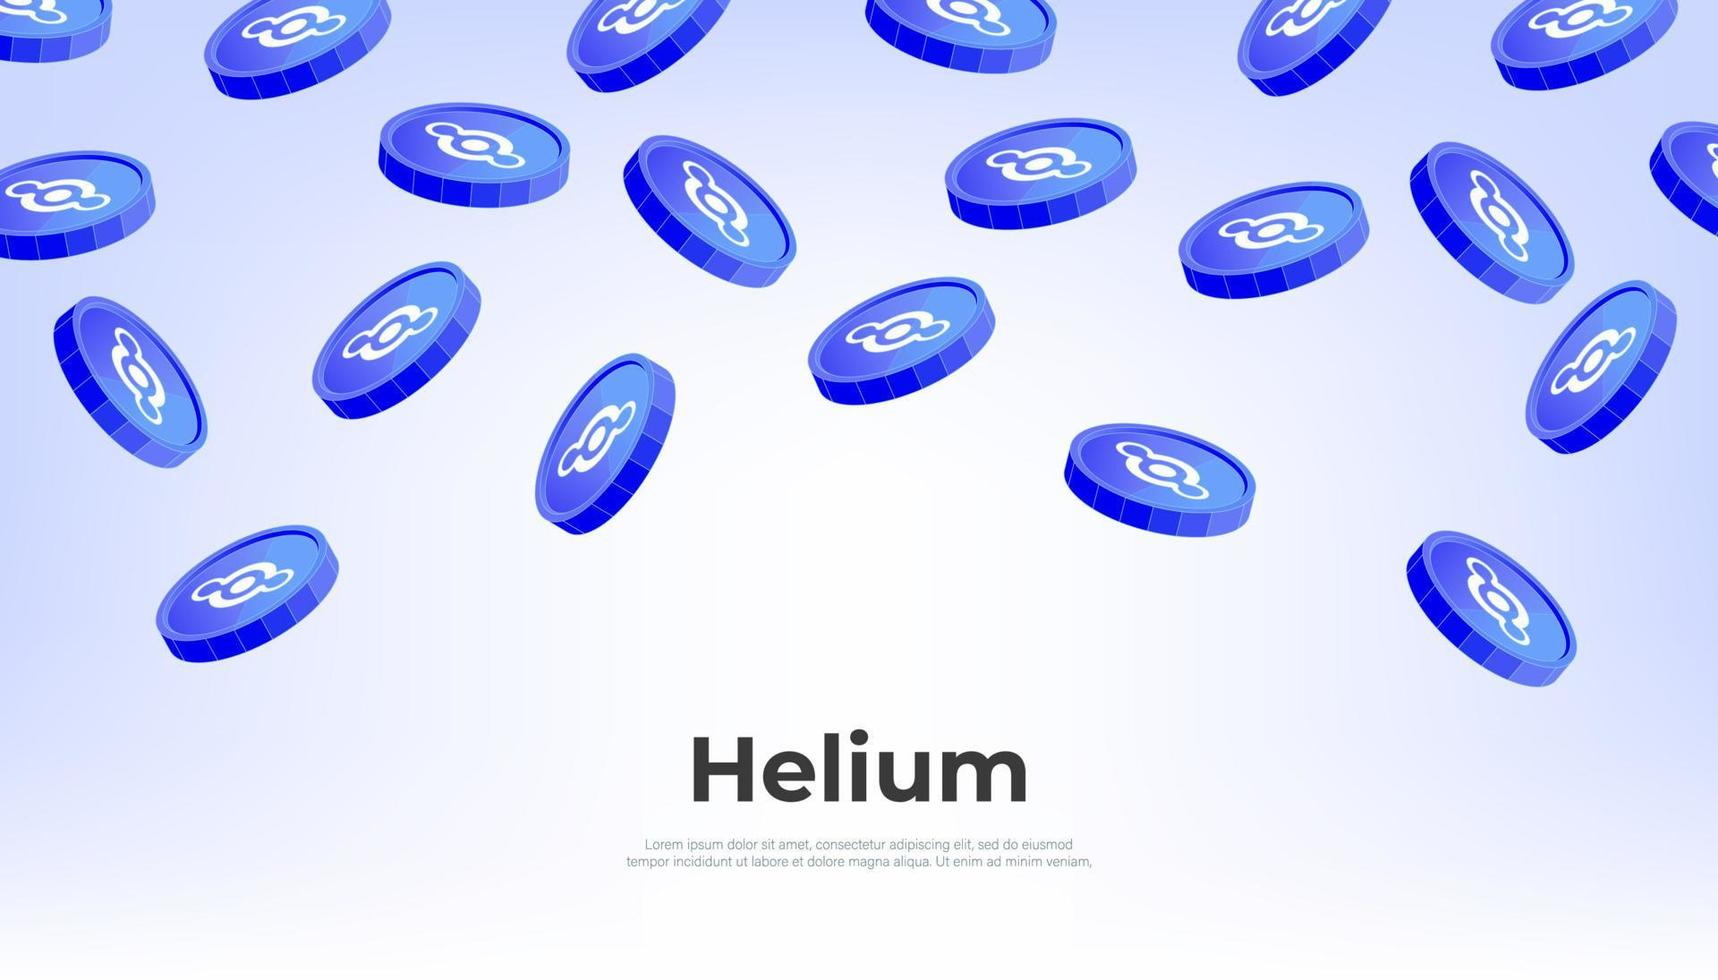 Helium coin falling from the sky. HNT cryptocurrency concept banner background. vector